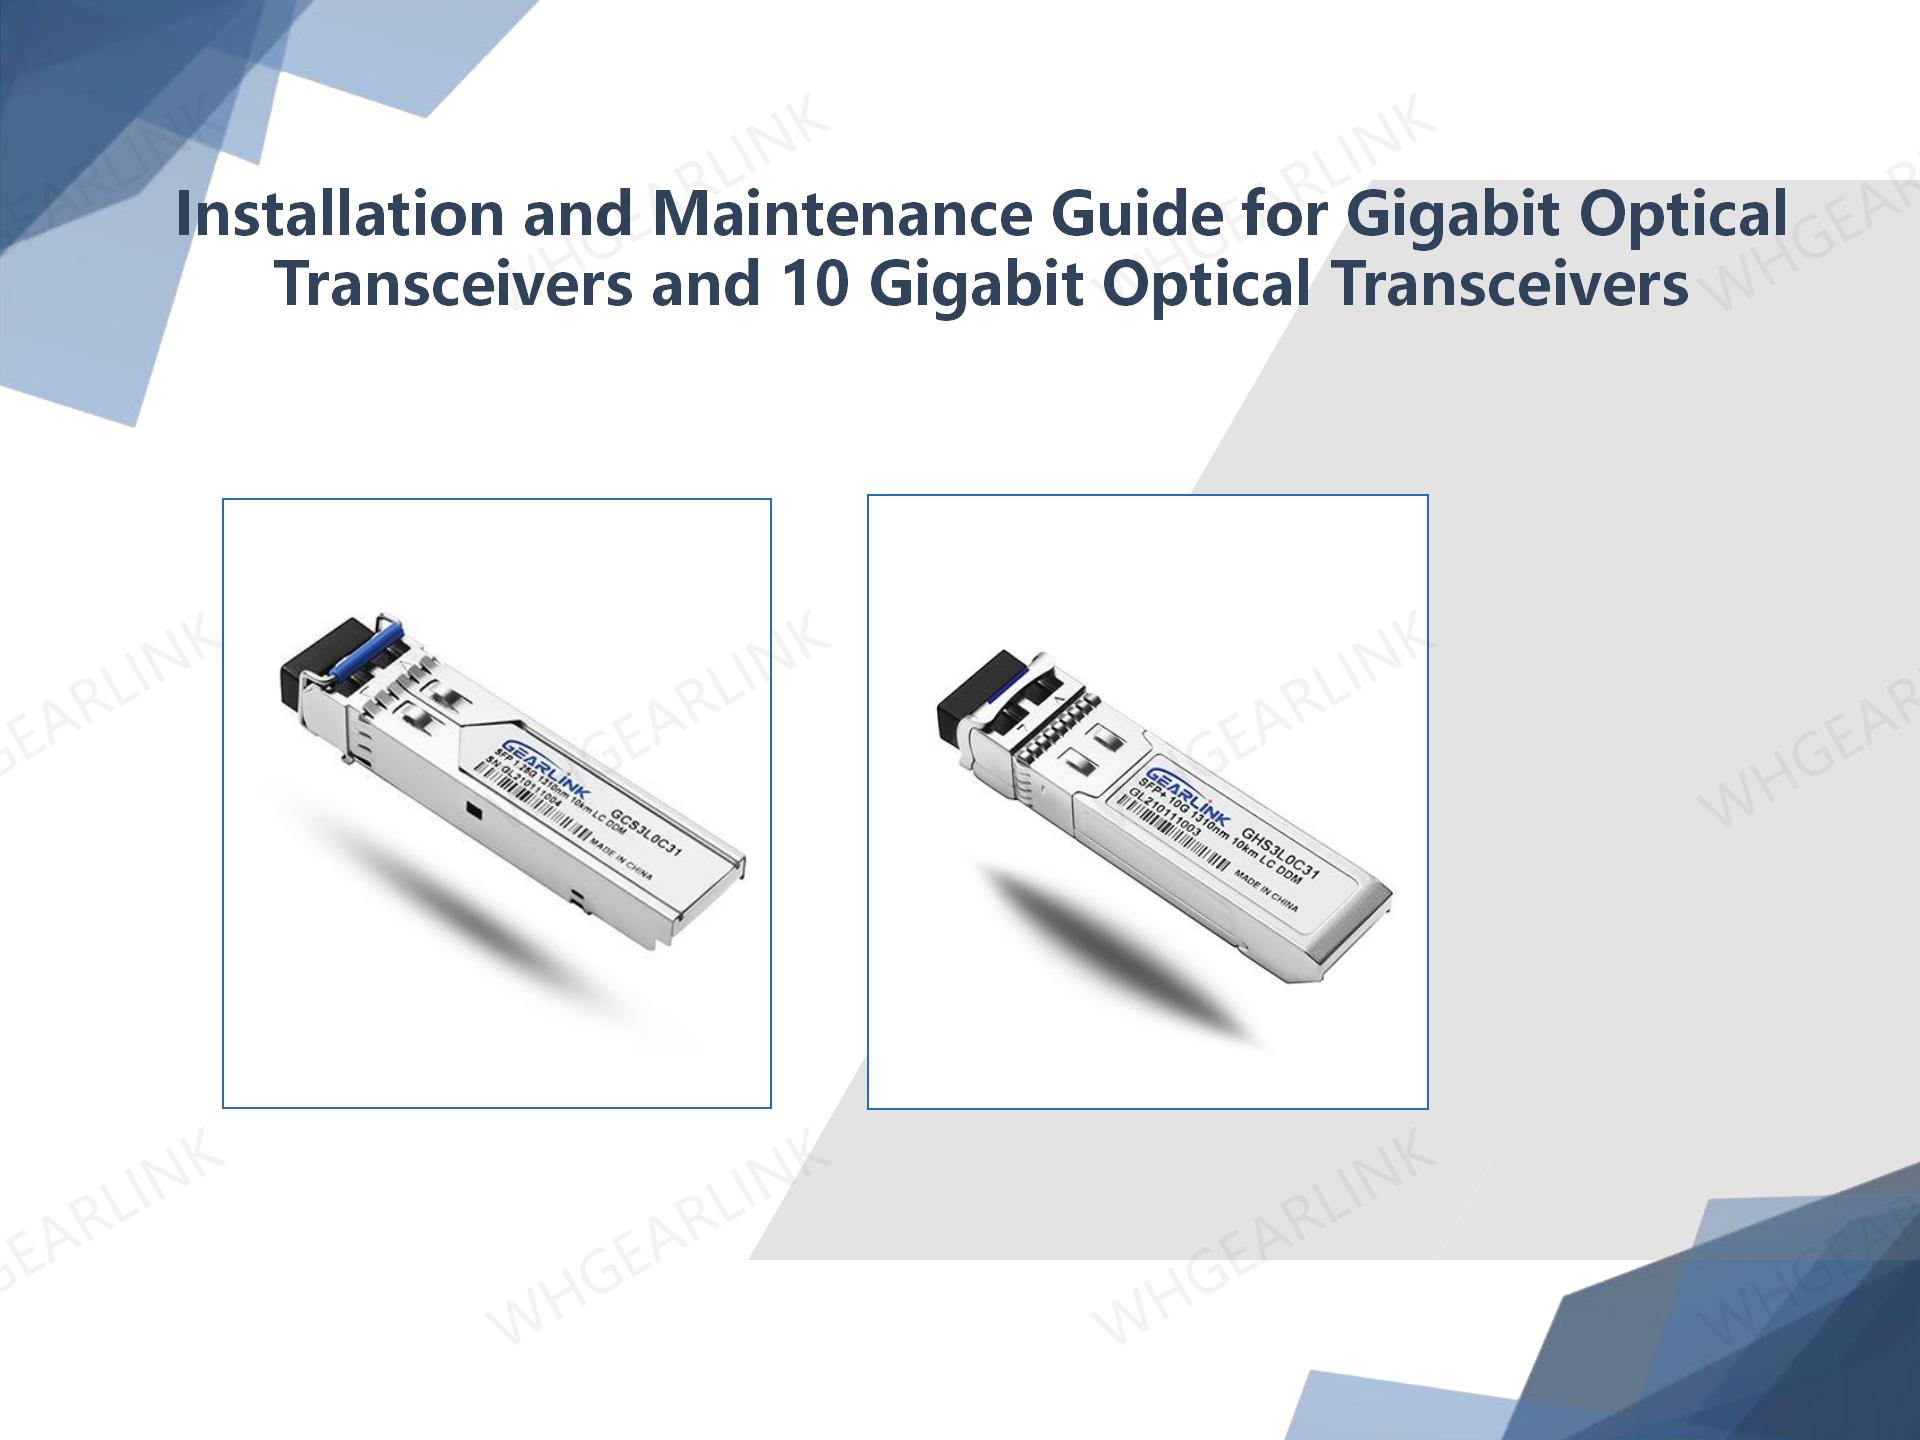 Installation and Maintenance Guide for Gigabit Optical Transceivers and 10 Gigabit Optical Transceivers